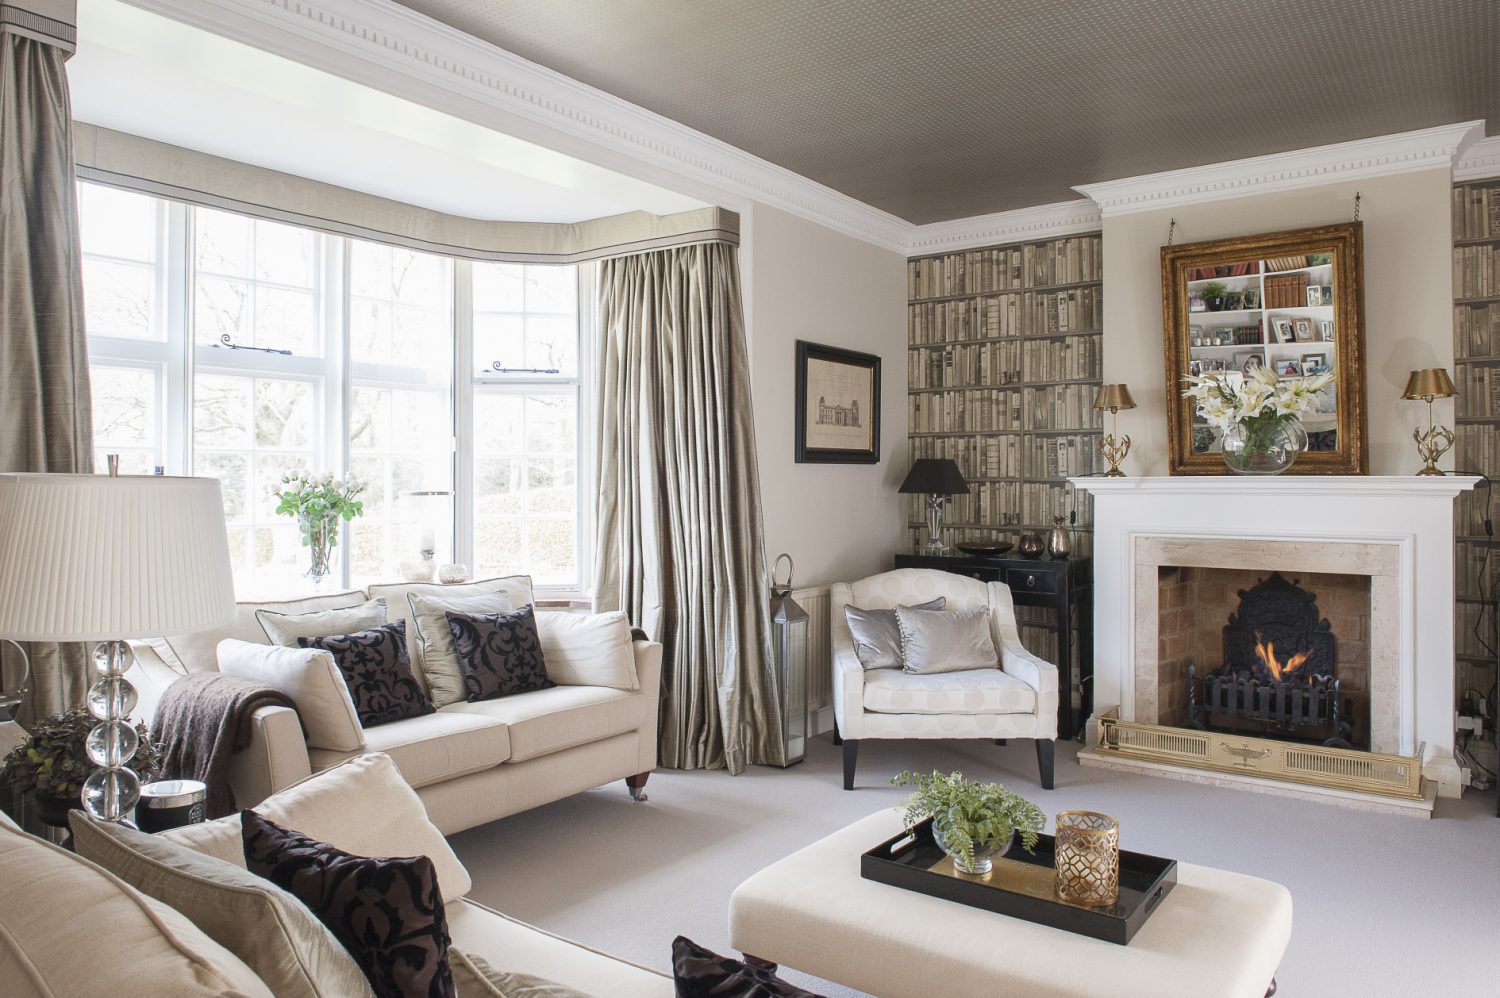 On either side of the fireplace, the alcoves are papered with Andrew Martin’s faux books and over the mantelpiece, Victoria has hung a gilt mirror from a heavy antique chain that, cleverly, tilts the looking glass in a downward direction, reflecting the room